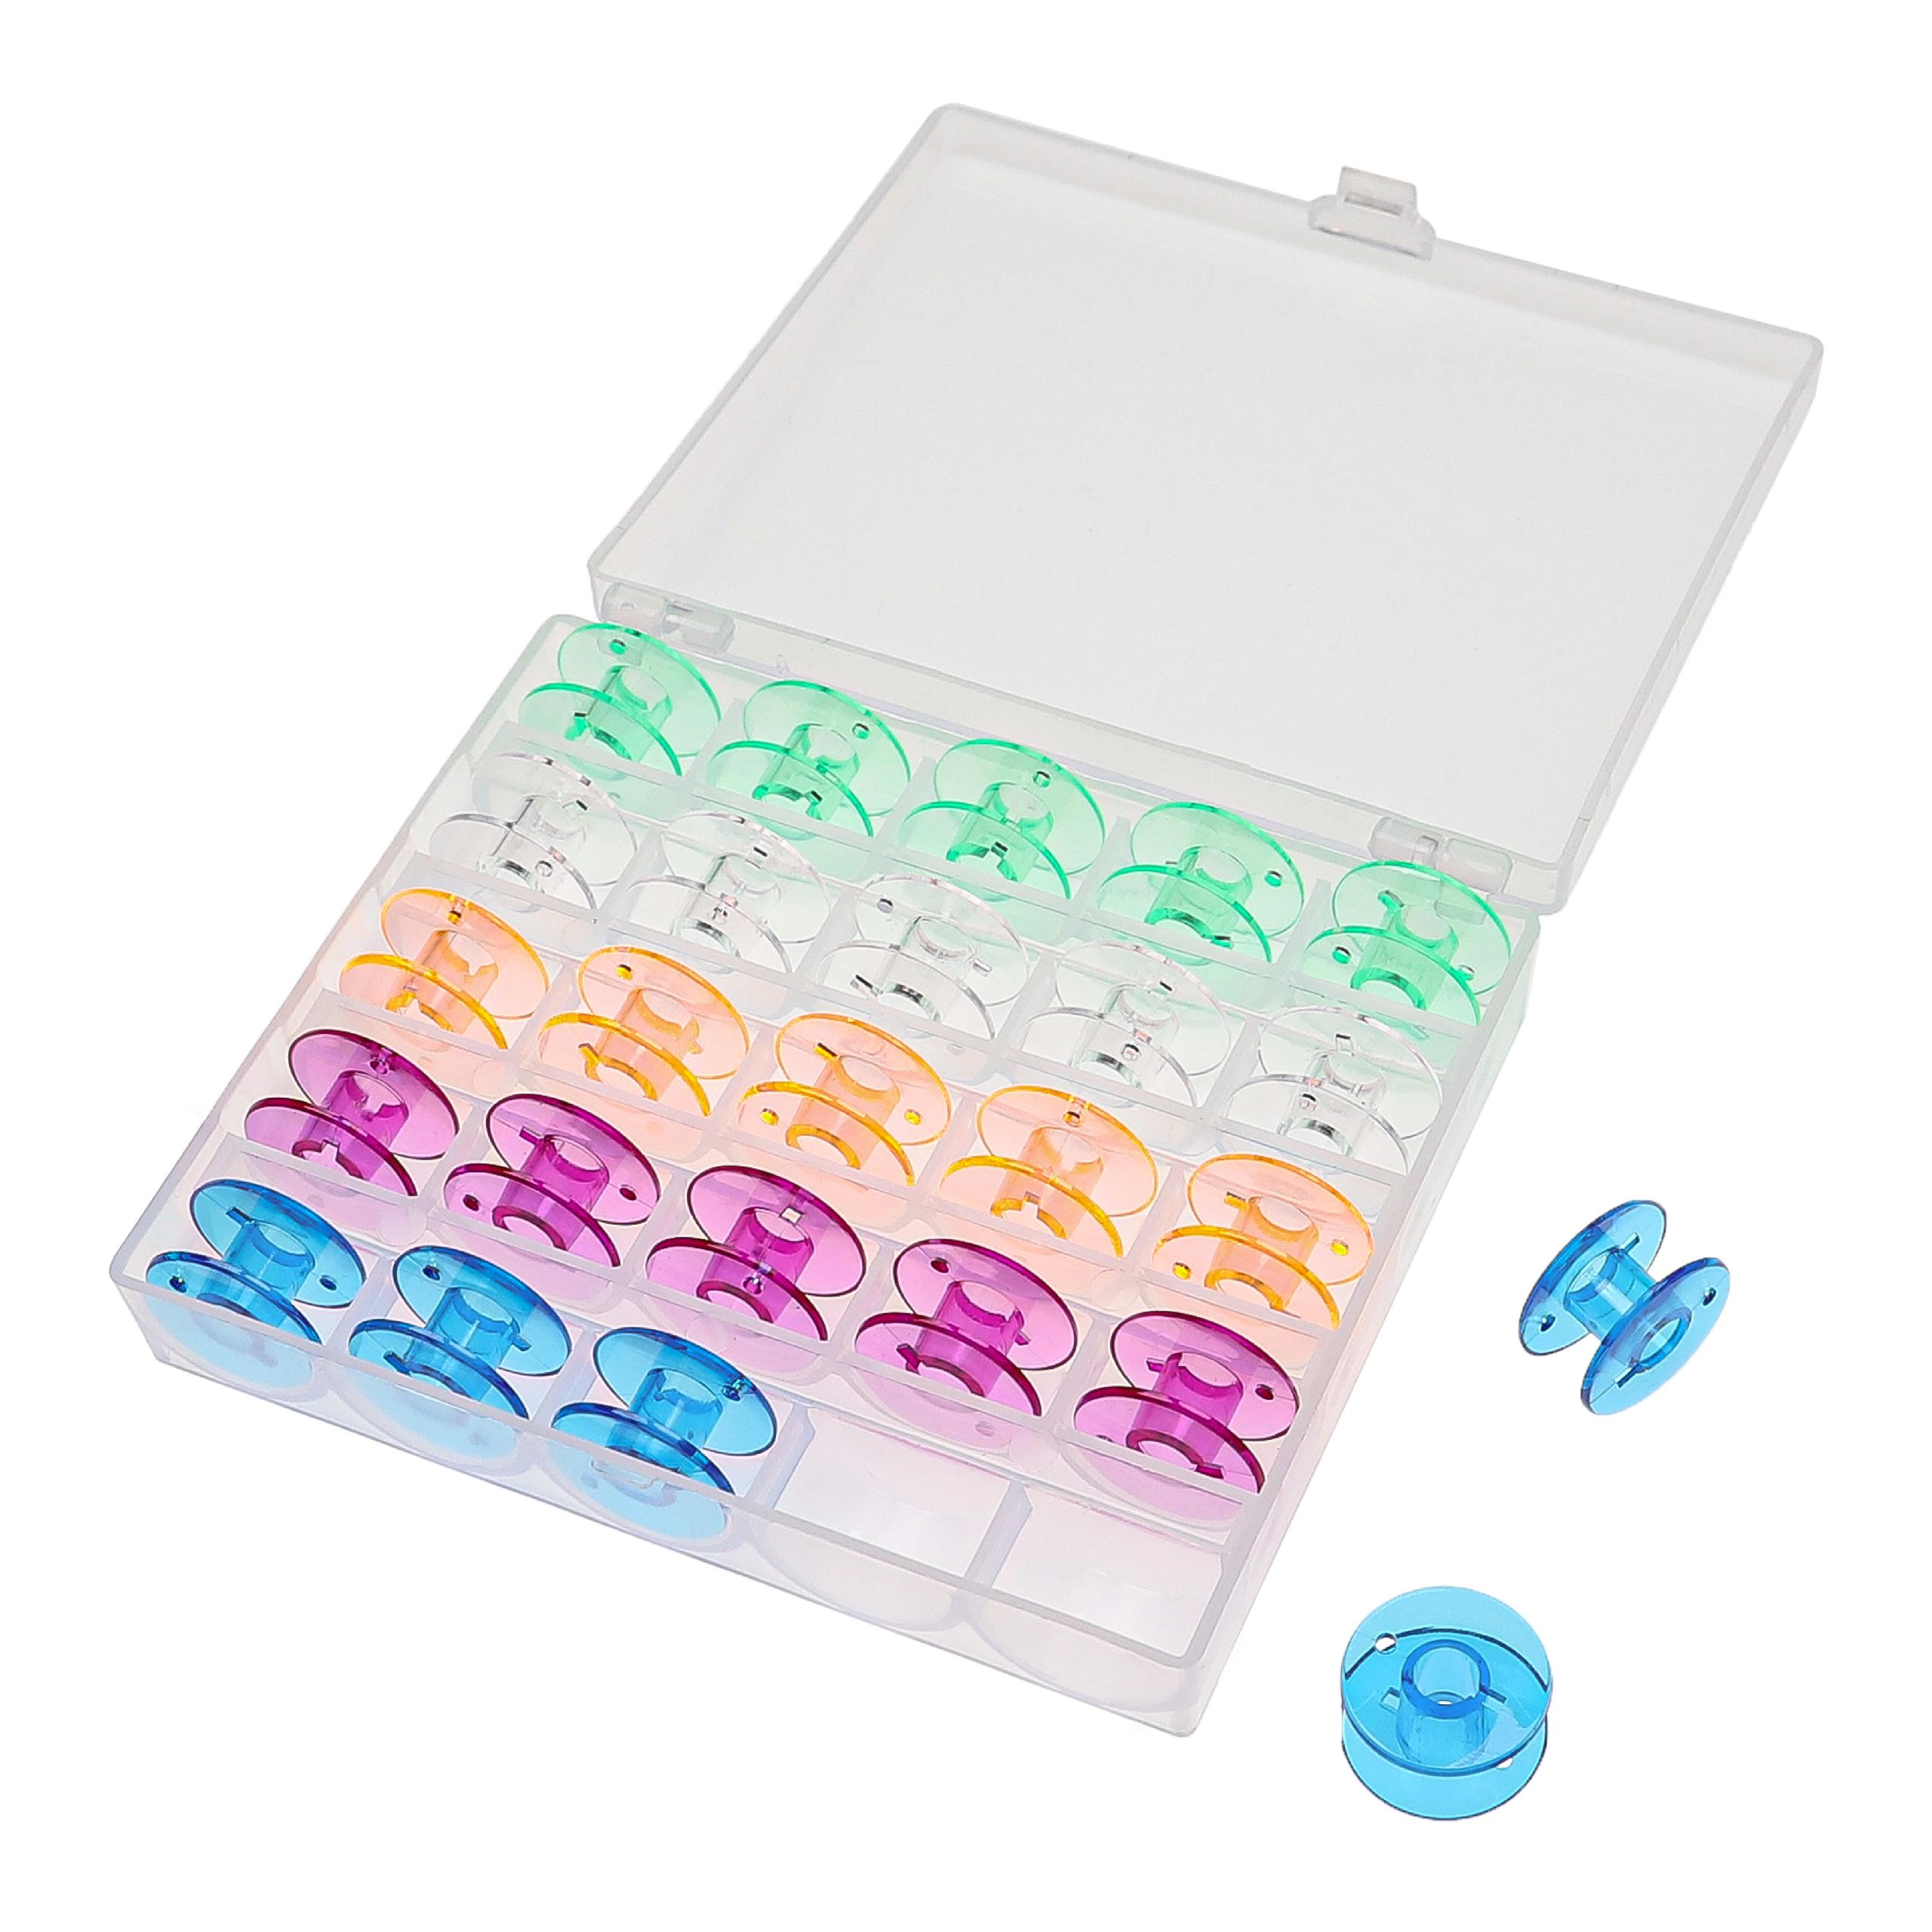 Storage Box for Many Standard Sewing Machine Bobbins - incl. Lower Thread Spool, Coloured